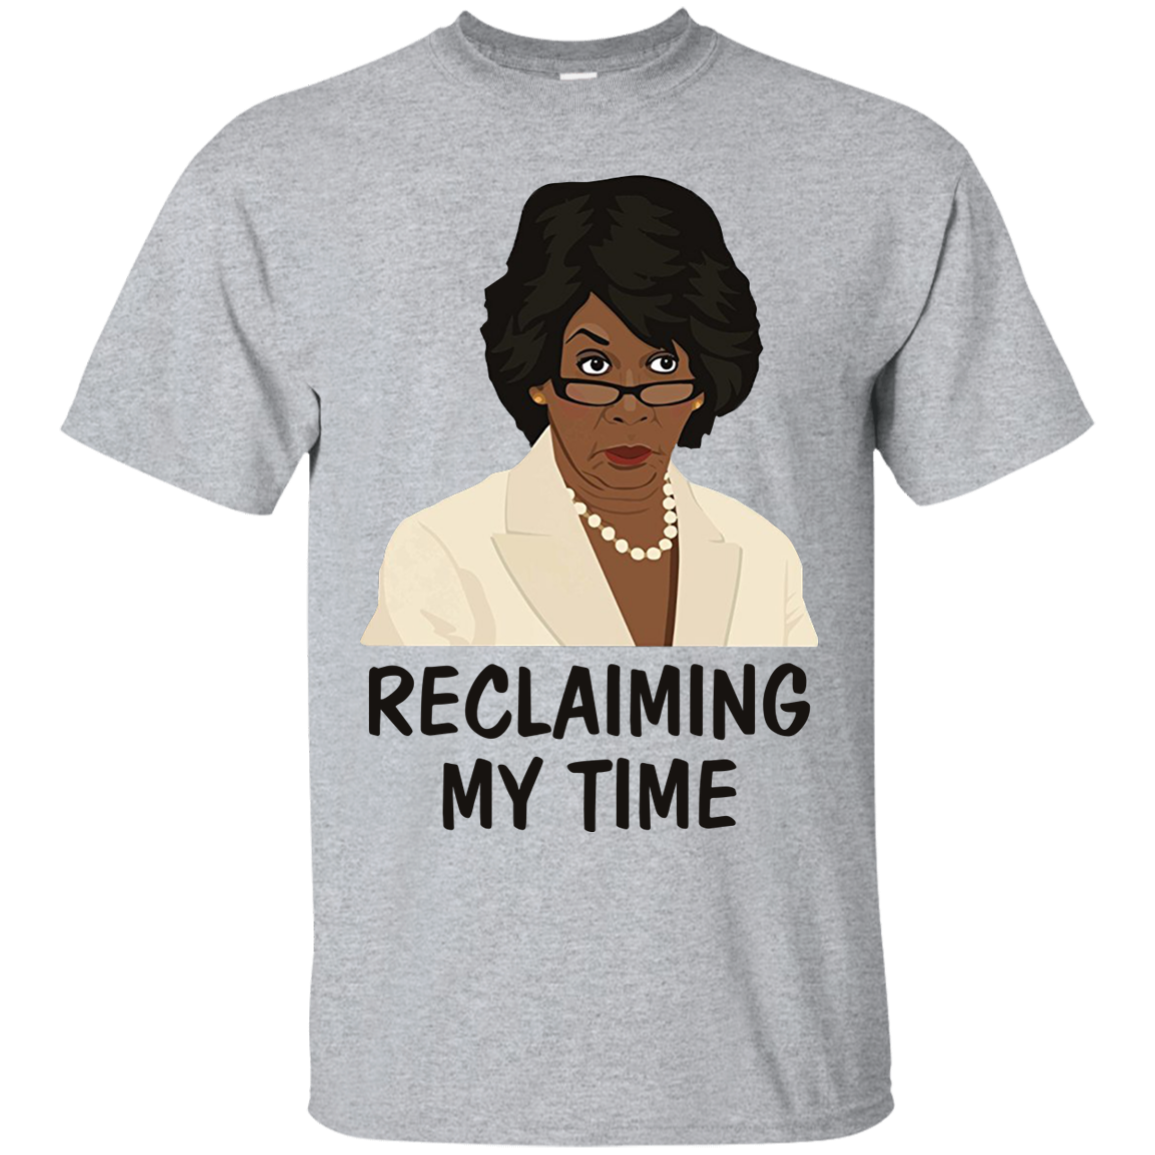 Reclaiming my time shirt, Maxine Waters